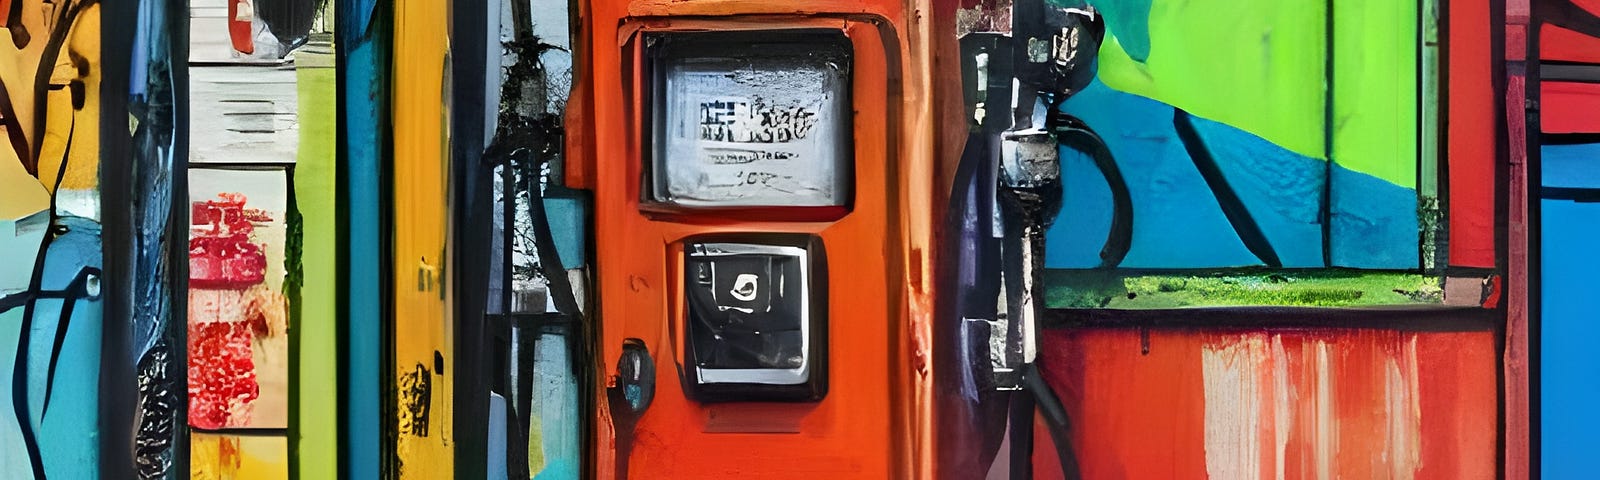 colorful fuel pump at a gas station